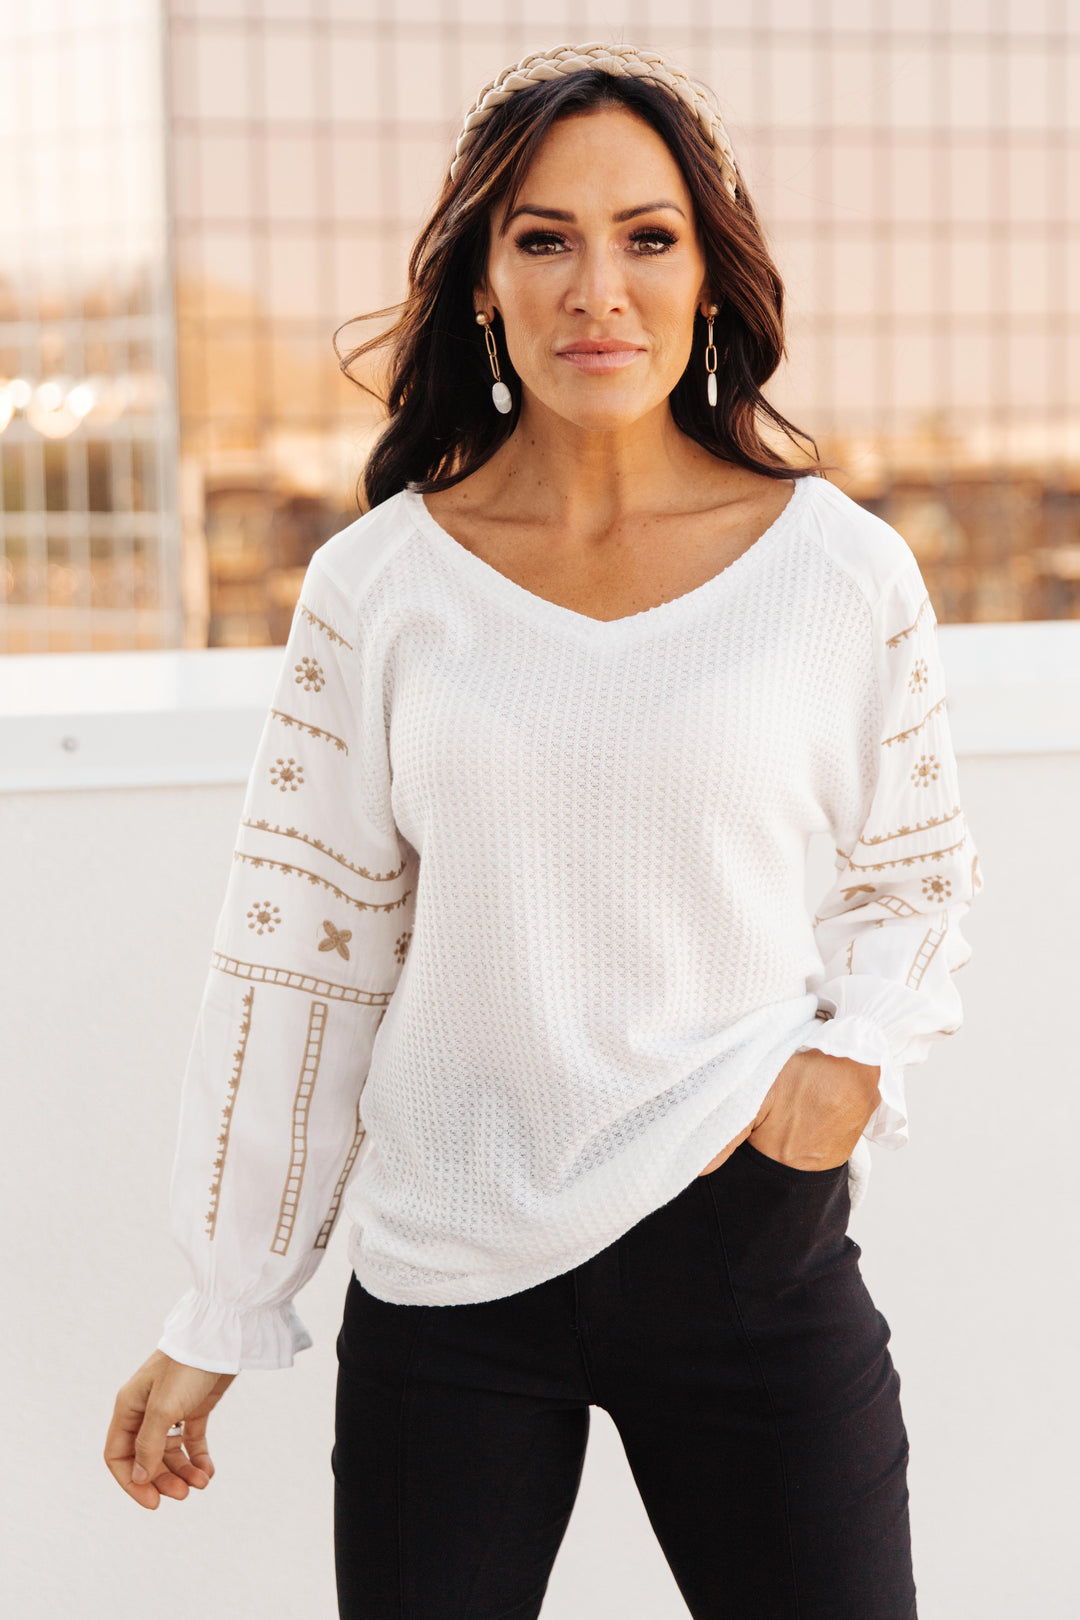 Breath Of Fresh Air Top-Long Sleeve Tops-Krush Kandy, Women's Online Fashion Boutique Located in Phoenix, Arizona (Scottsdale Area)